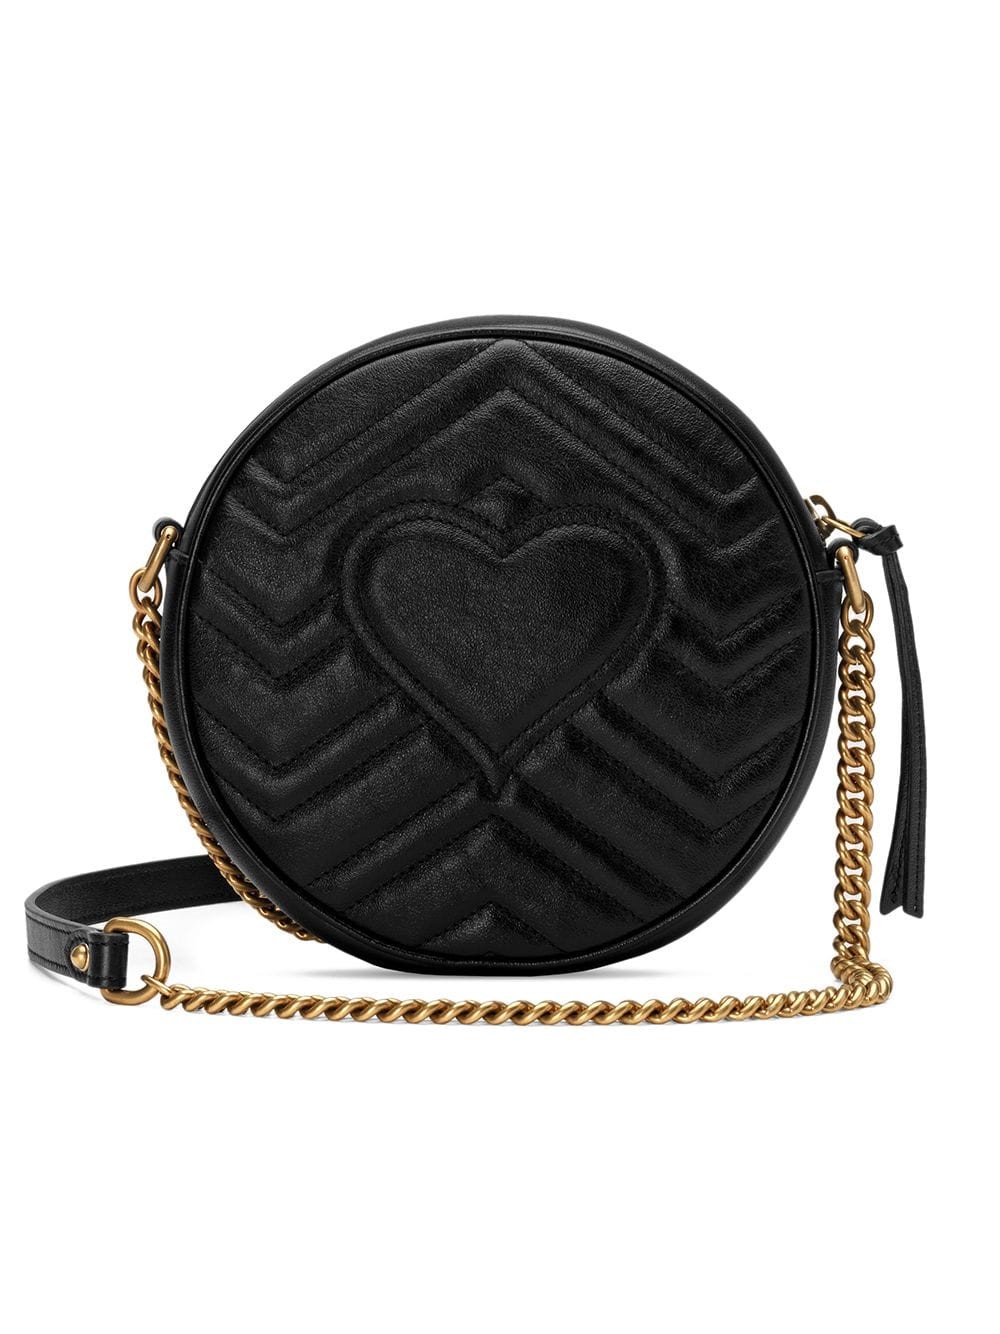 gucci GG MARMONT ROUND BAG available on www.bagsaleusa.com/product-category/neverfull-bag/ - 27417